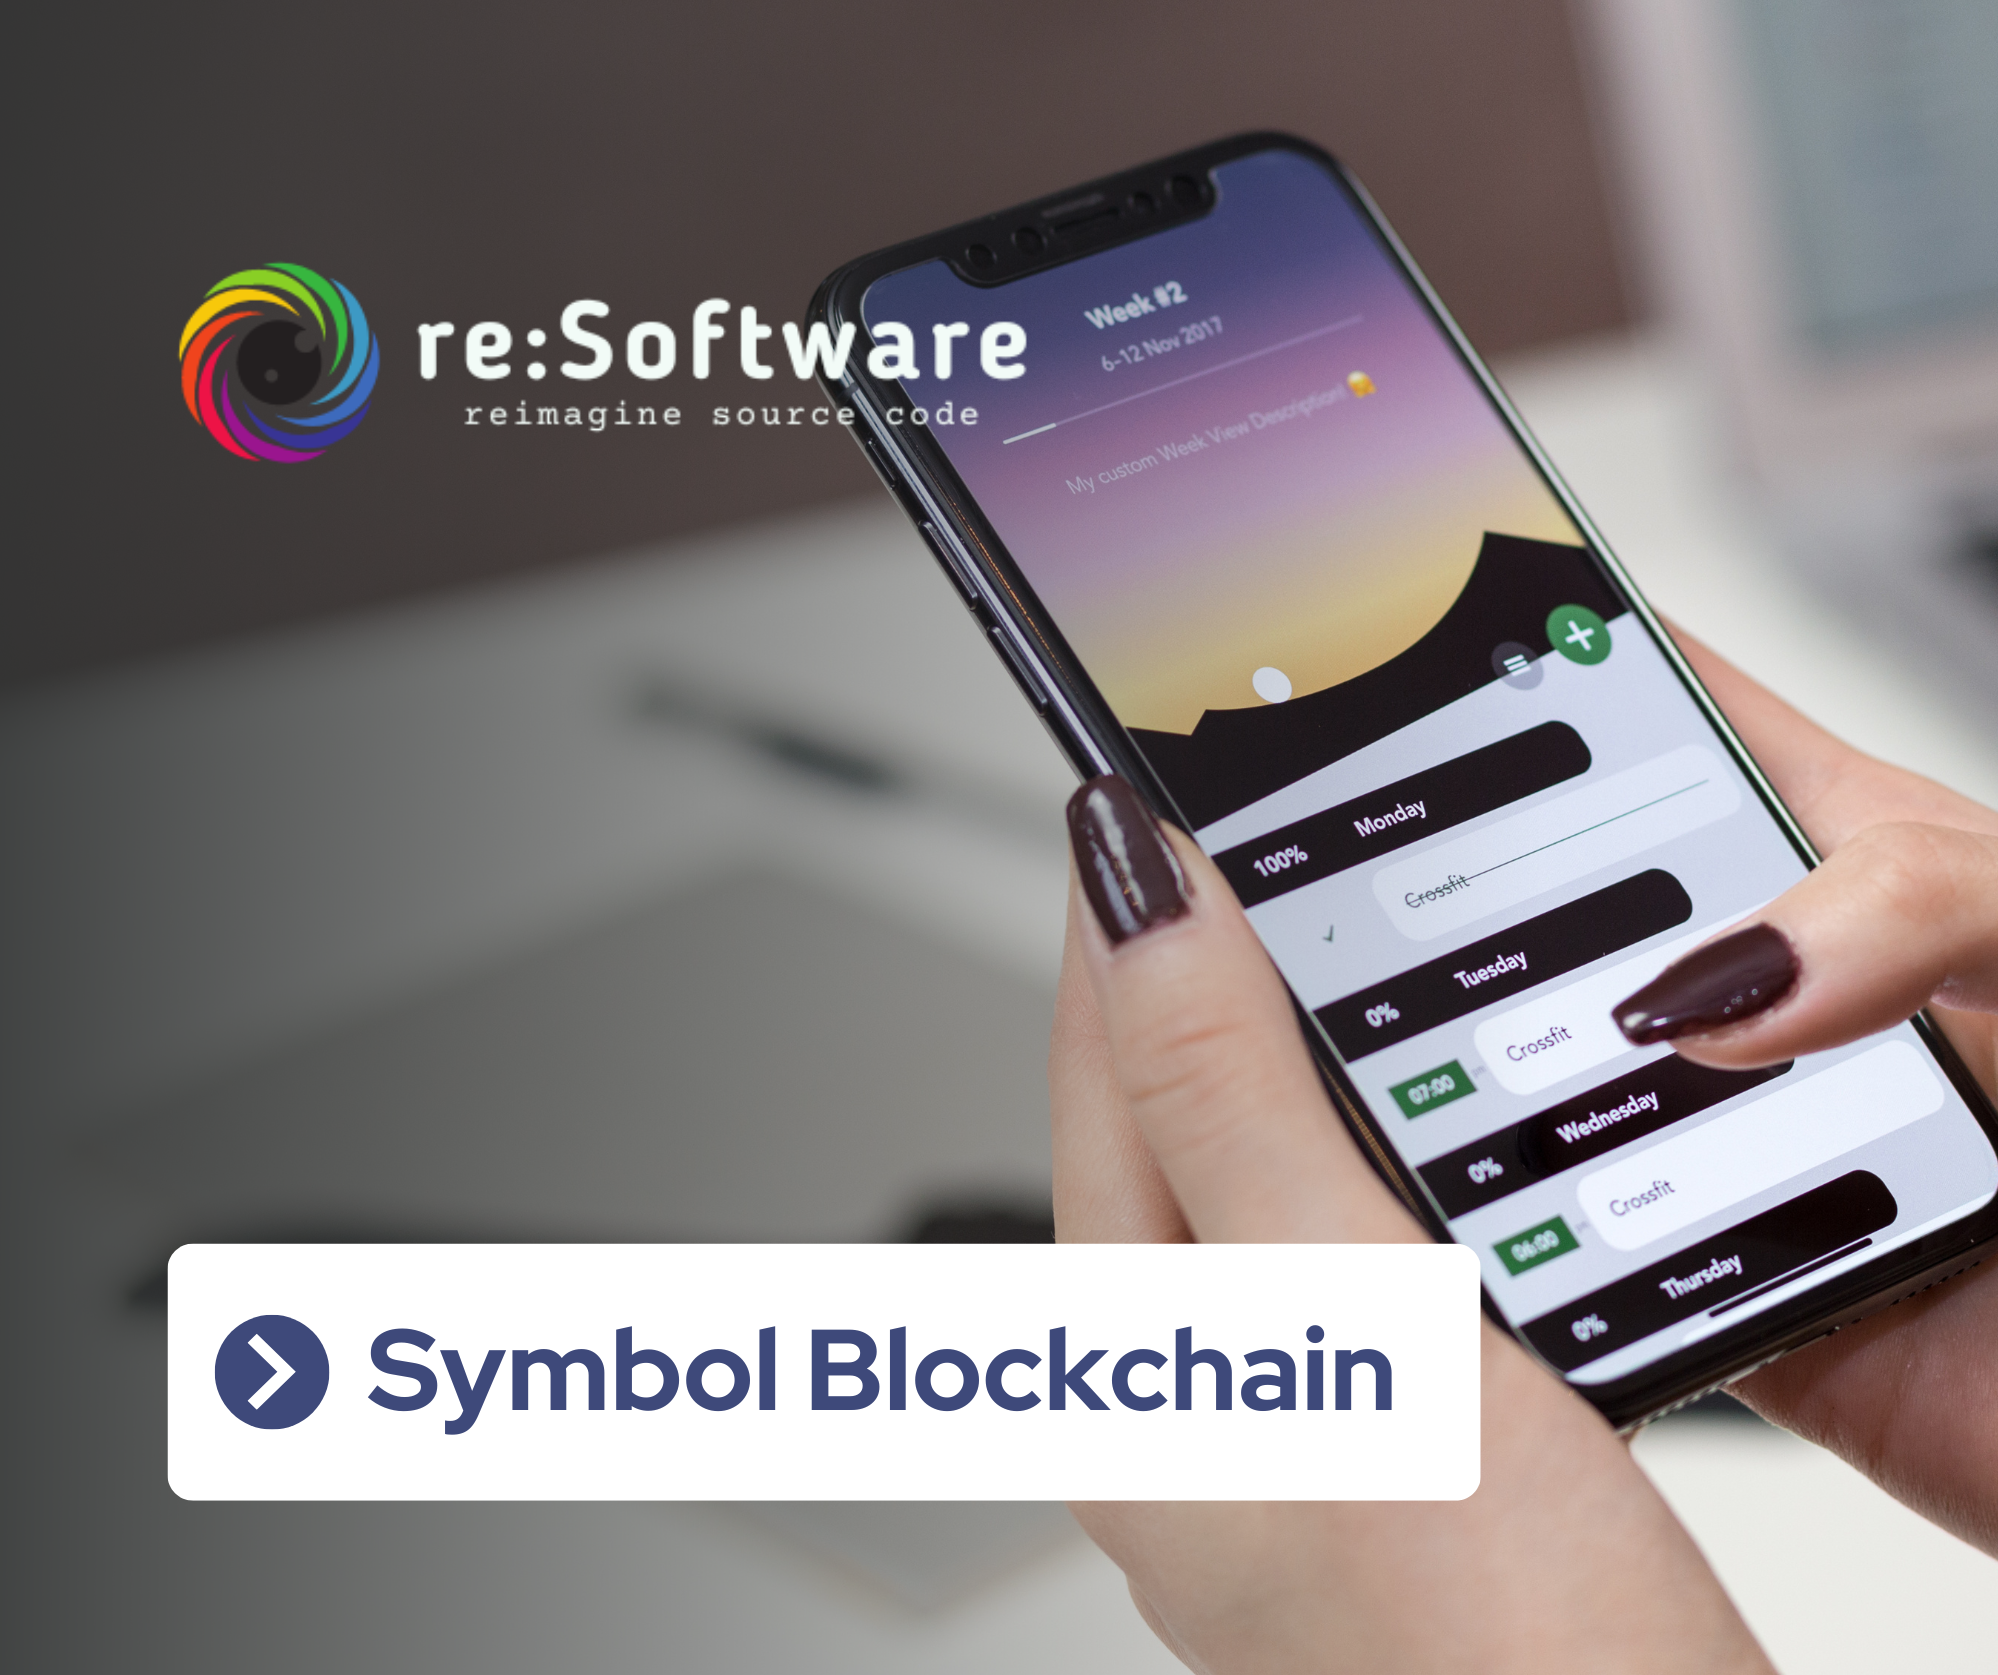 Symbol Blockchain by re:Software S.L.